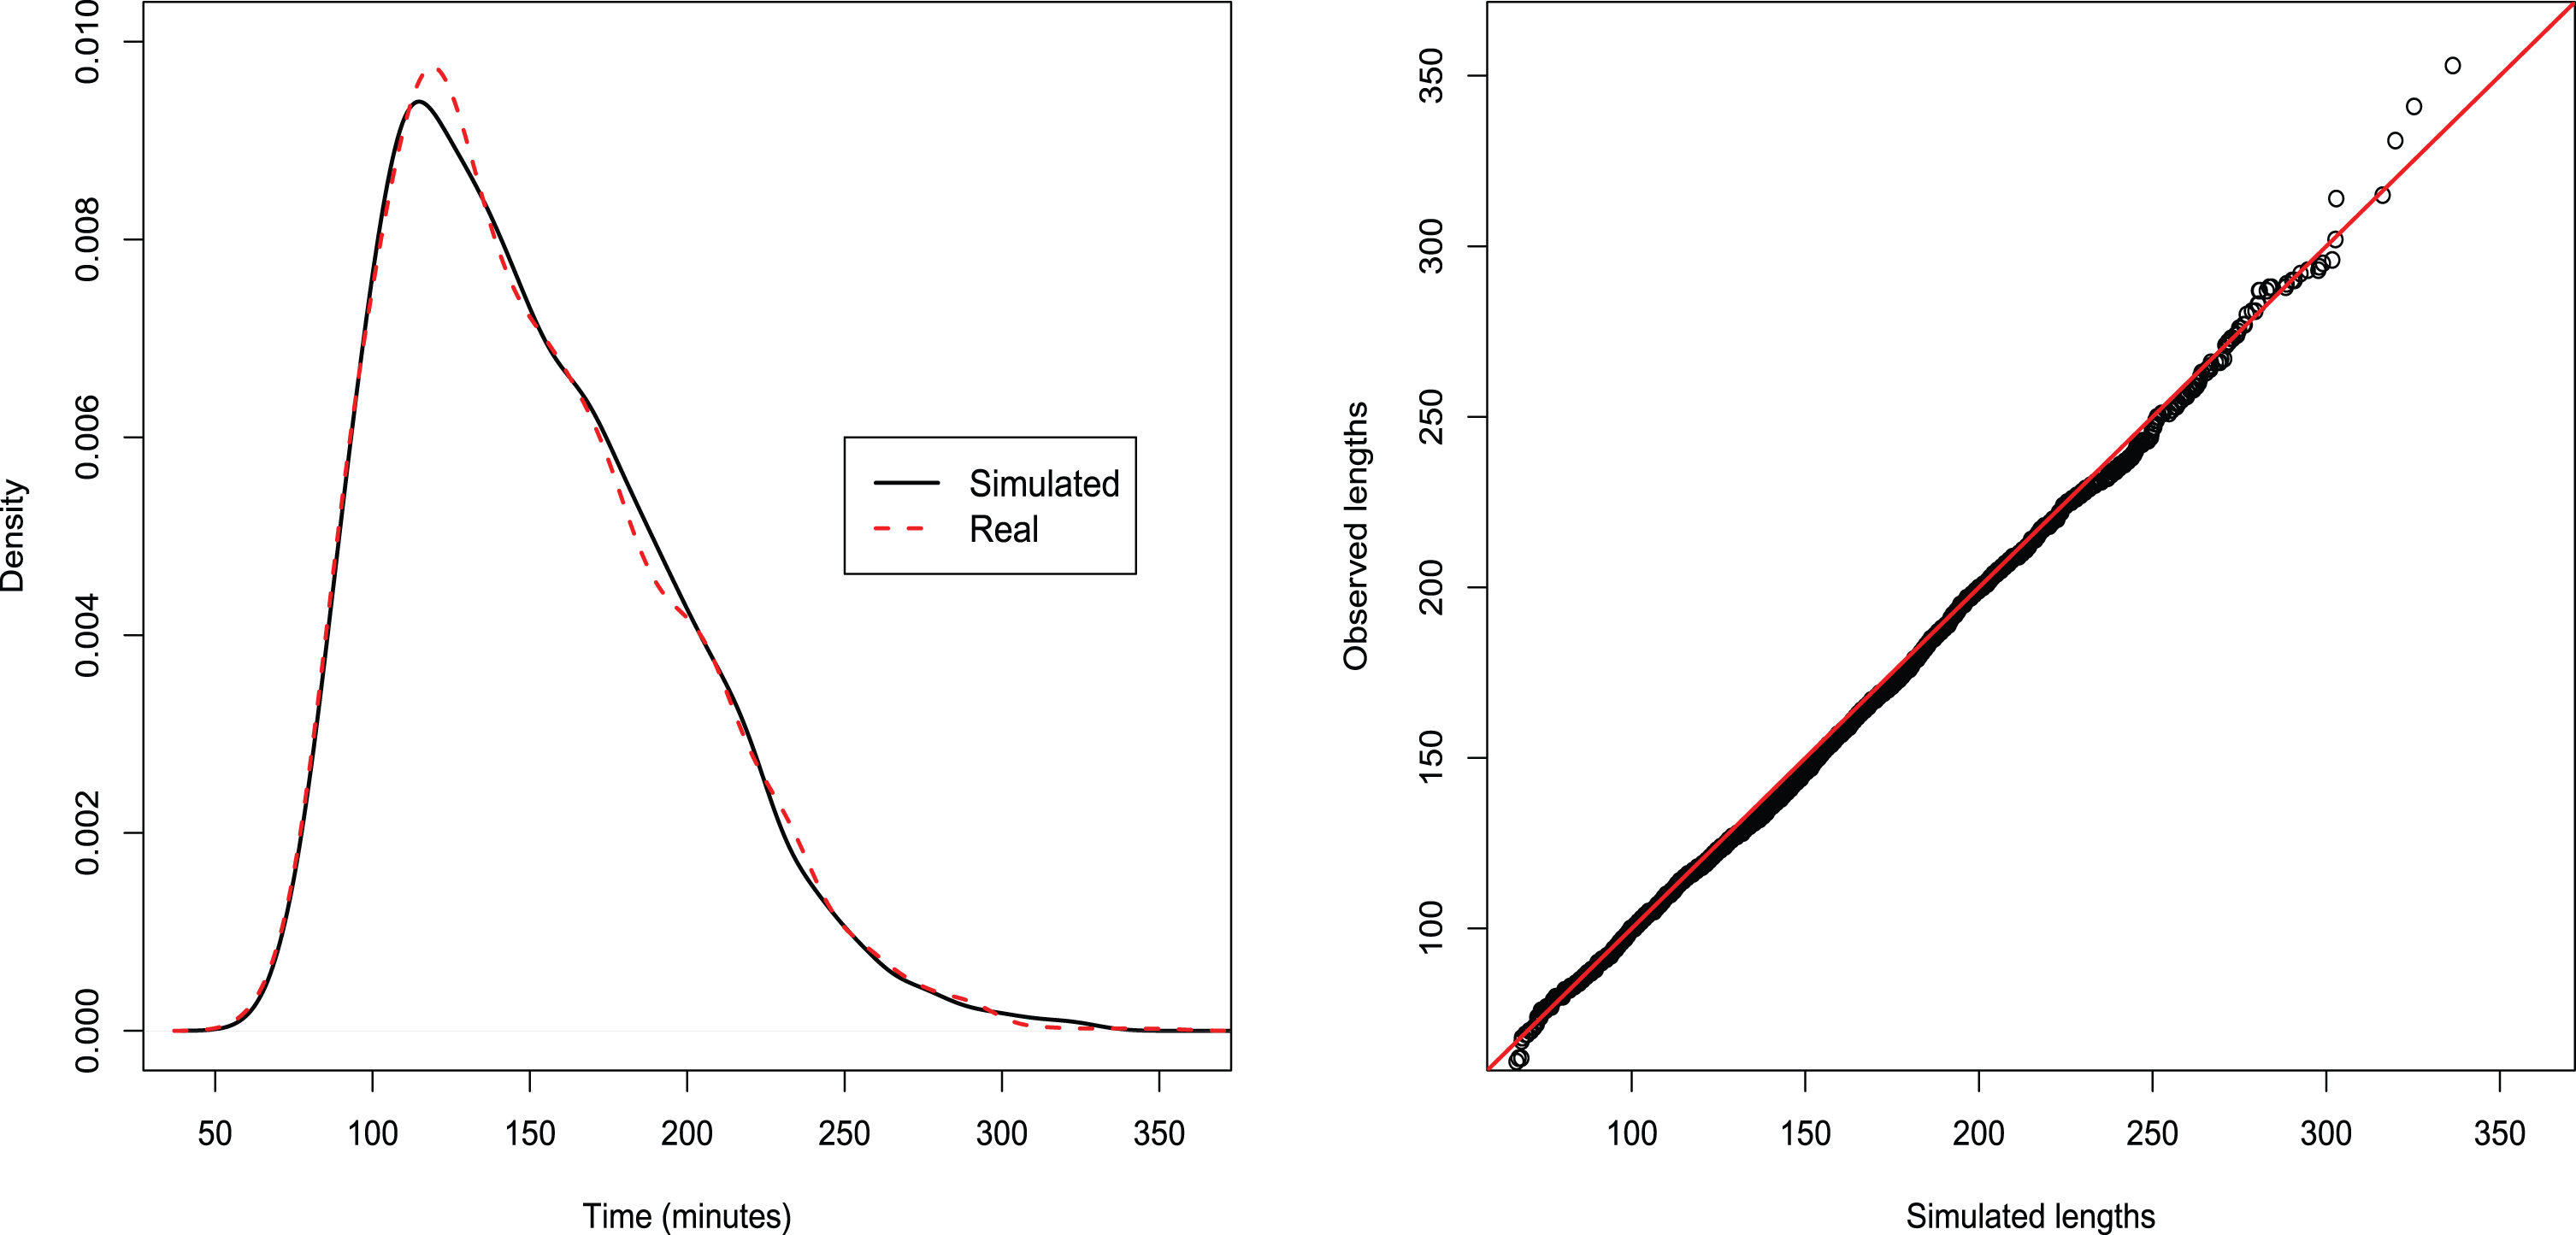 Best of 5: distributions and QQ-plots. Tests’ p-values: KS=0.47, AD=0.42, FP=0.75